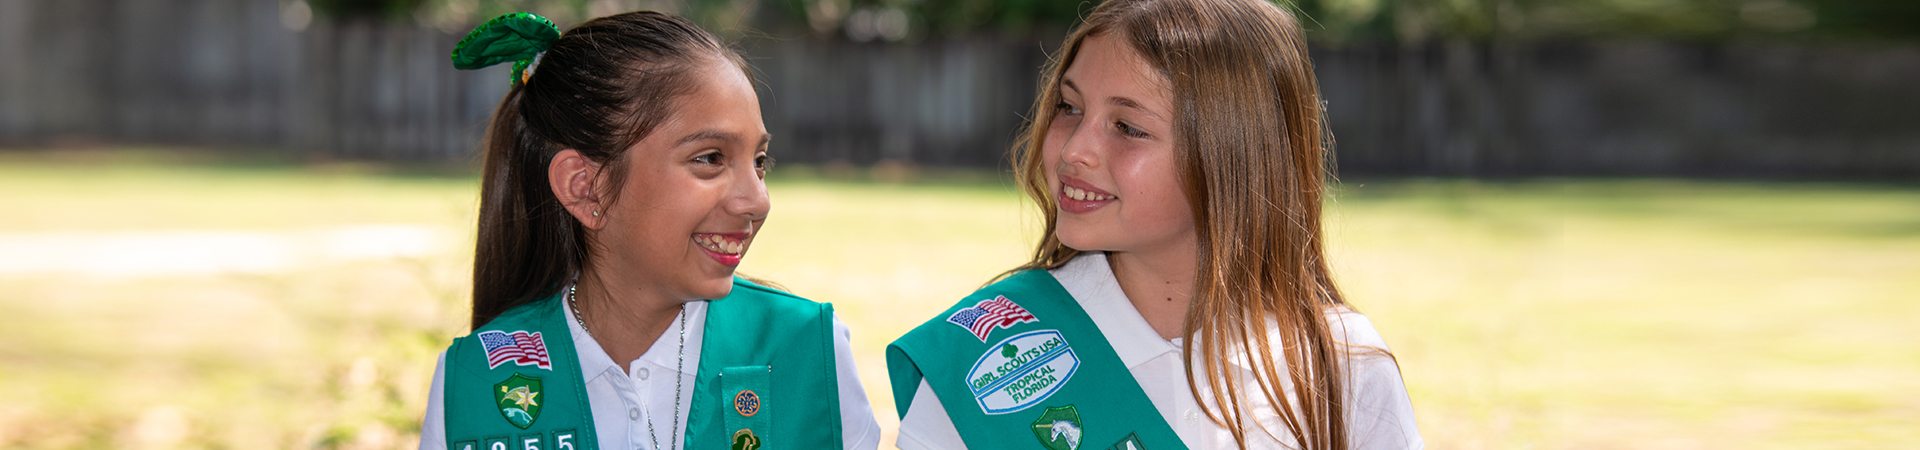  group of junior girl scouts walking outside hugging smiling at camera in junior vest and sash with badges 